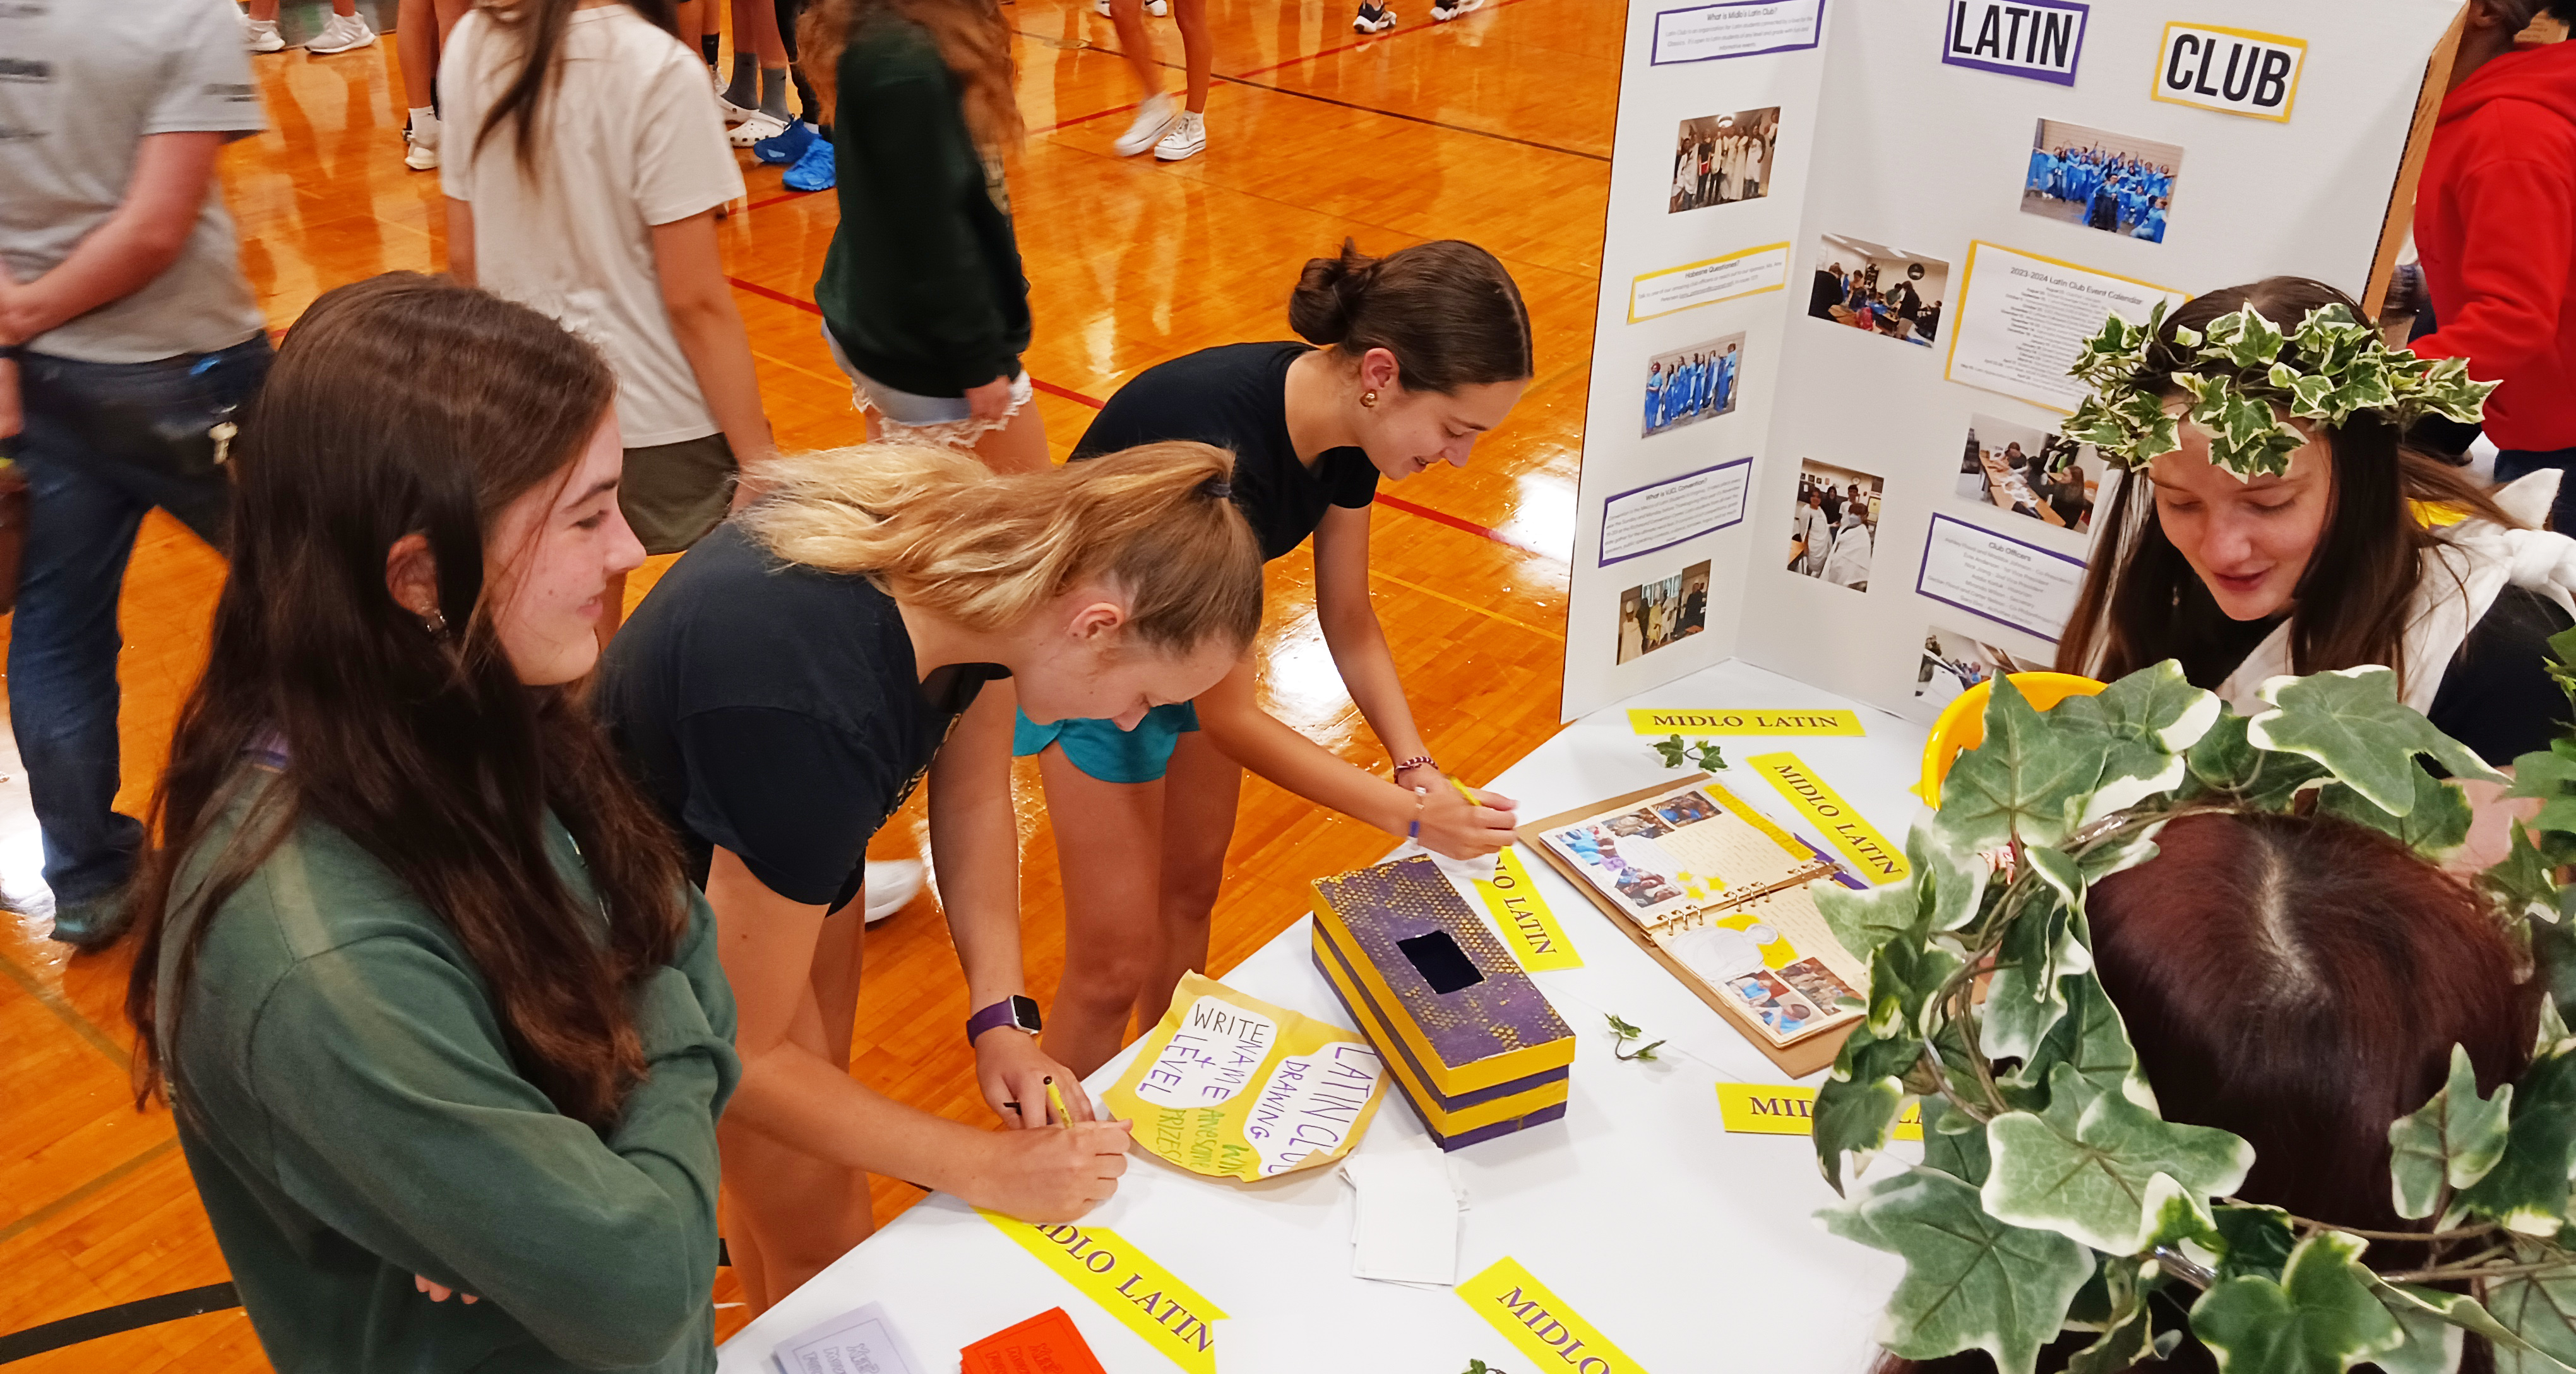 Students visiting a table about the Latin Club in the school gymnasium